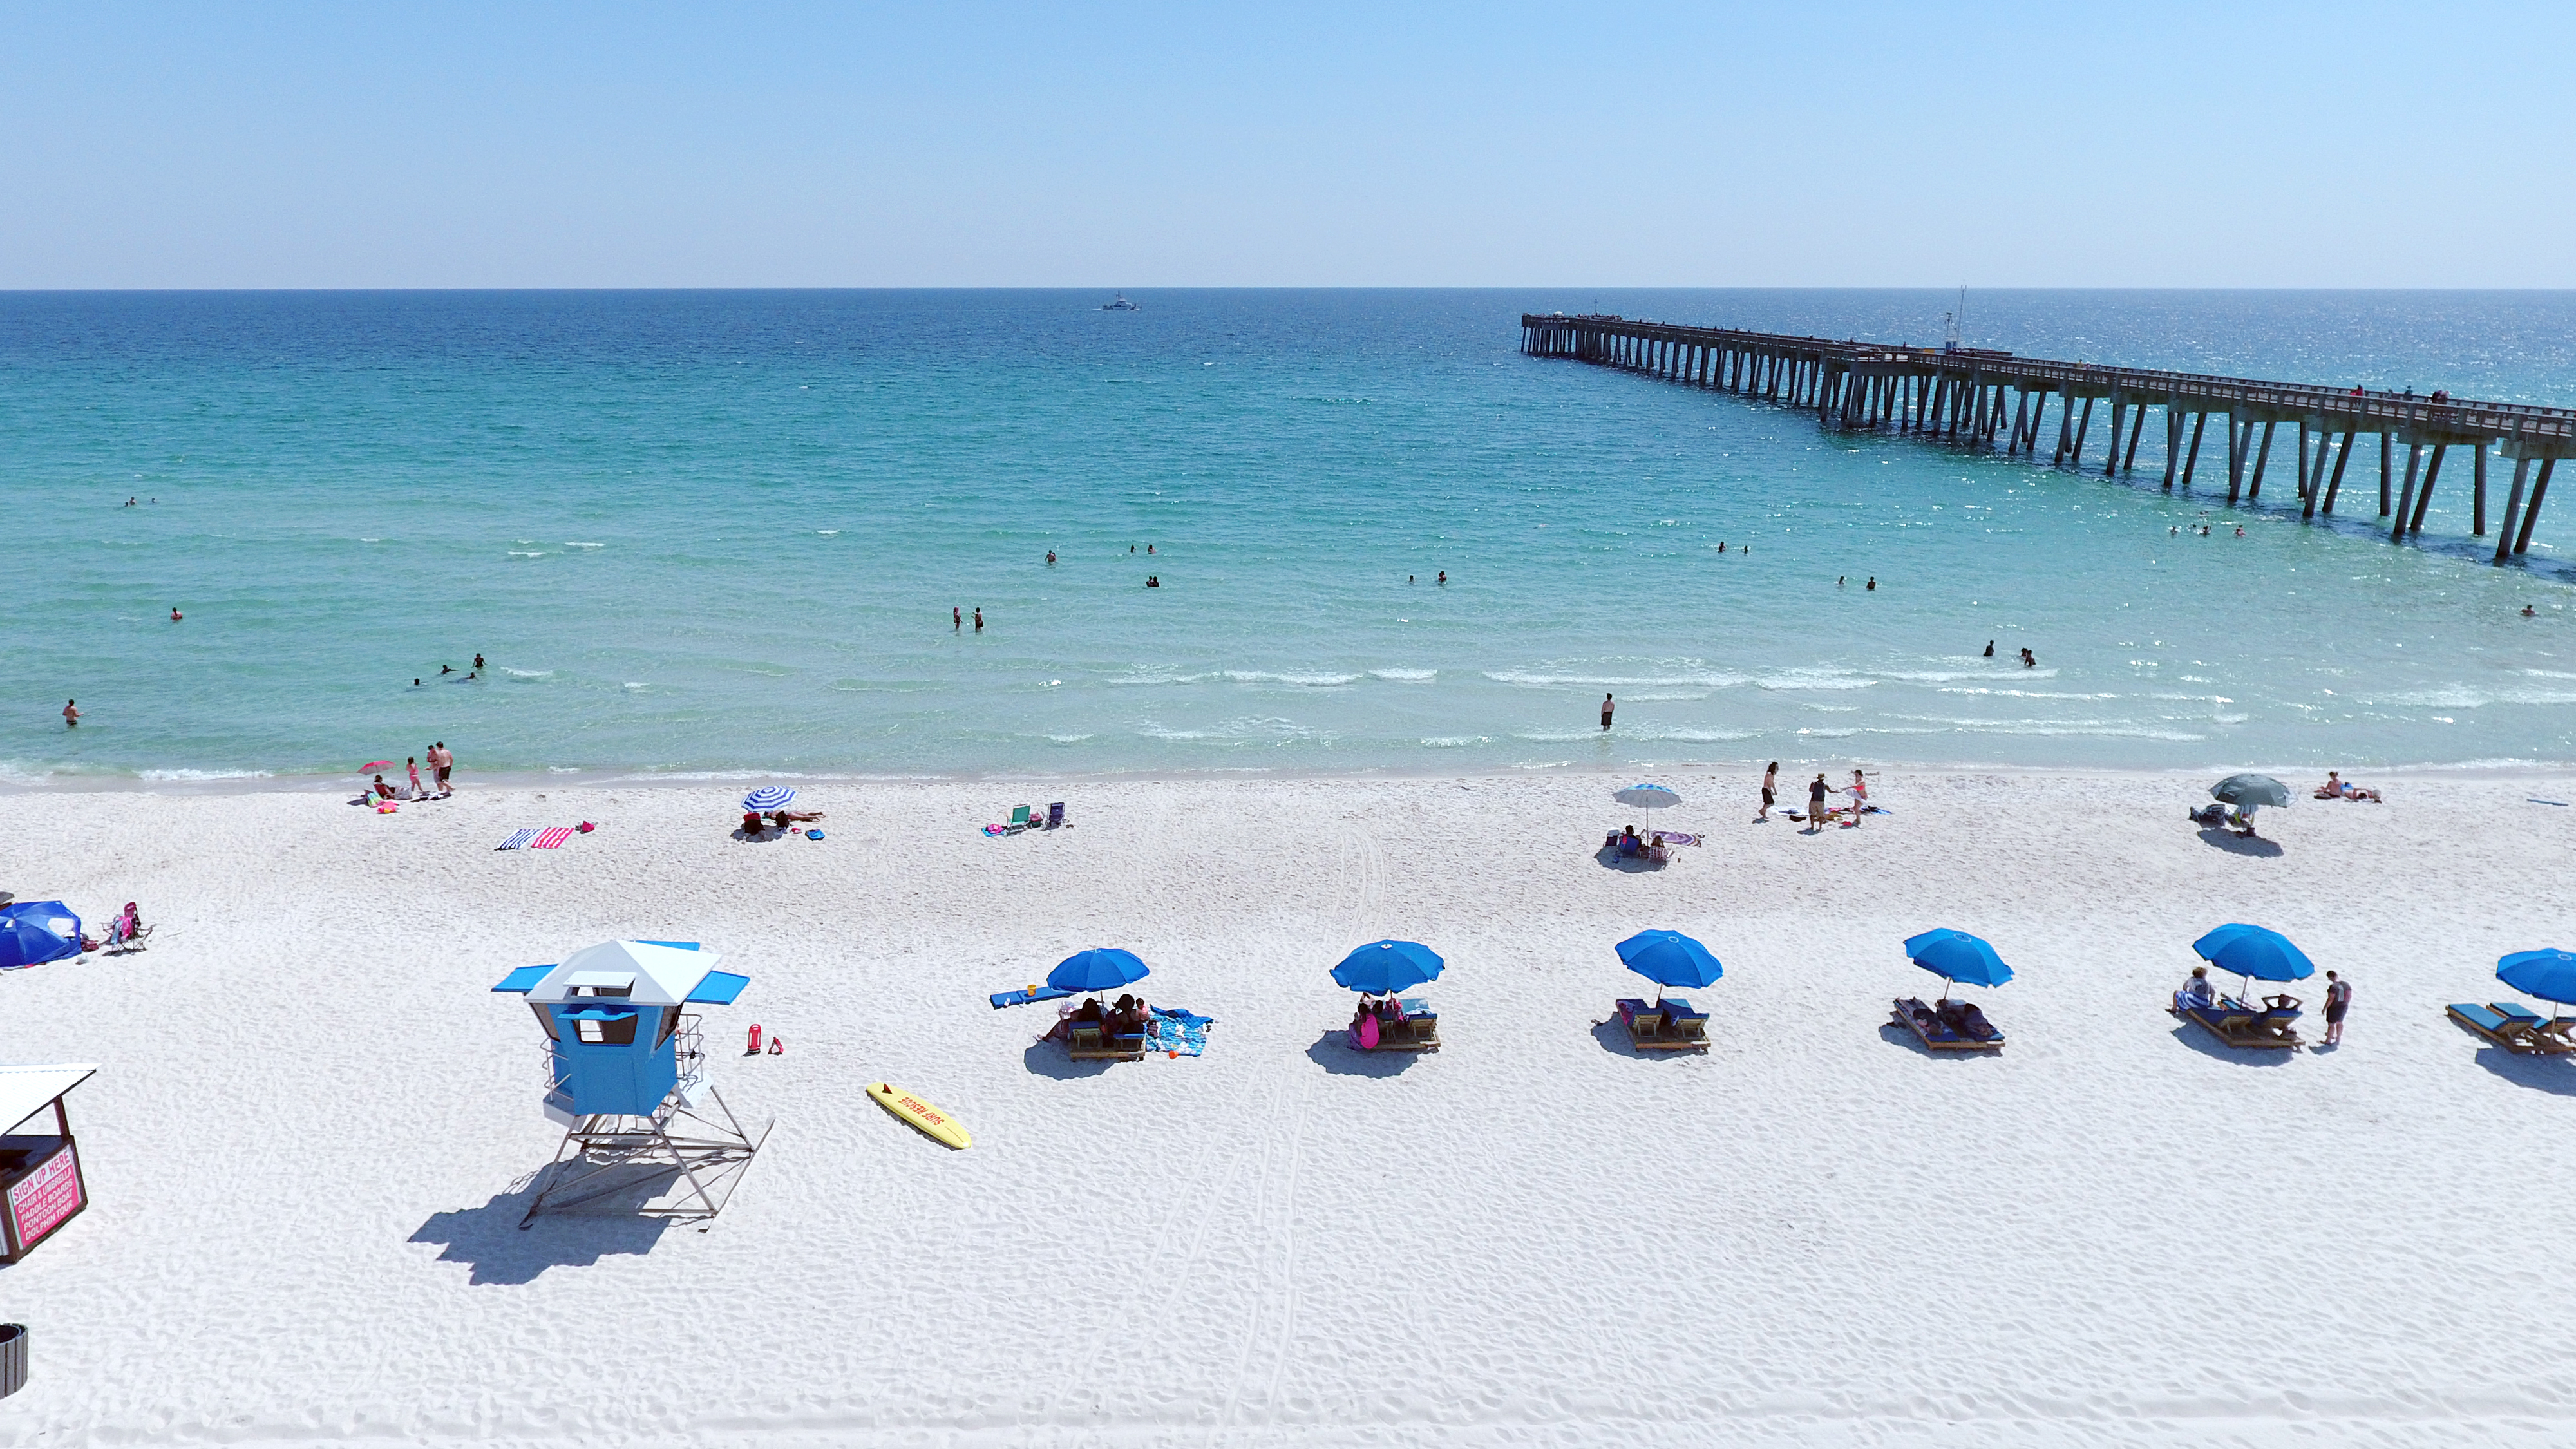 Panama City Beach Home to one of America’s Top Beaches and a New